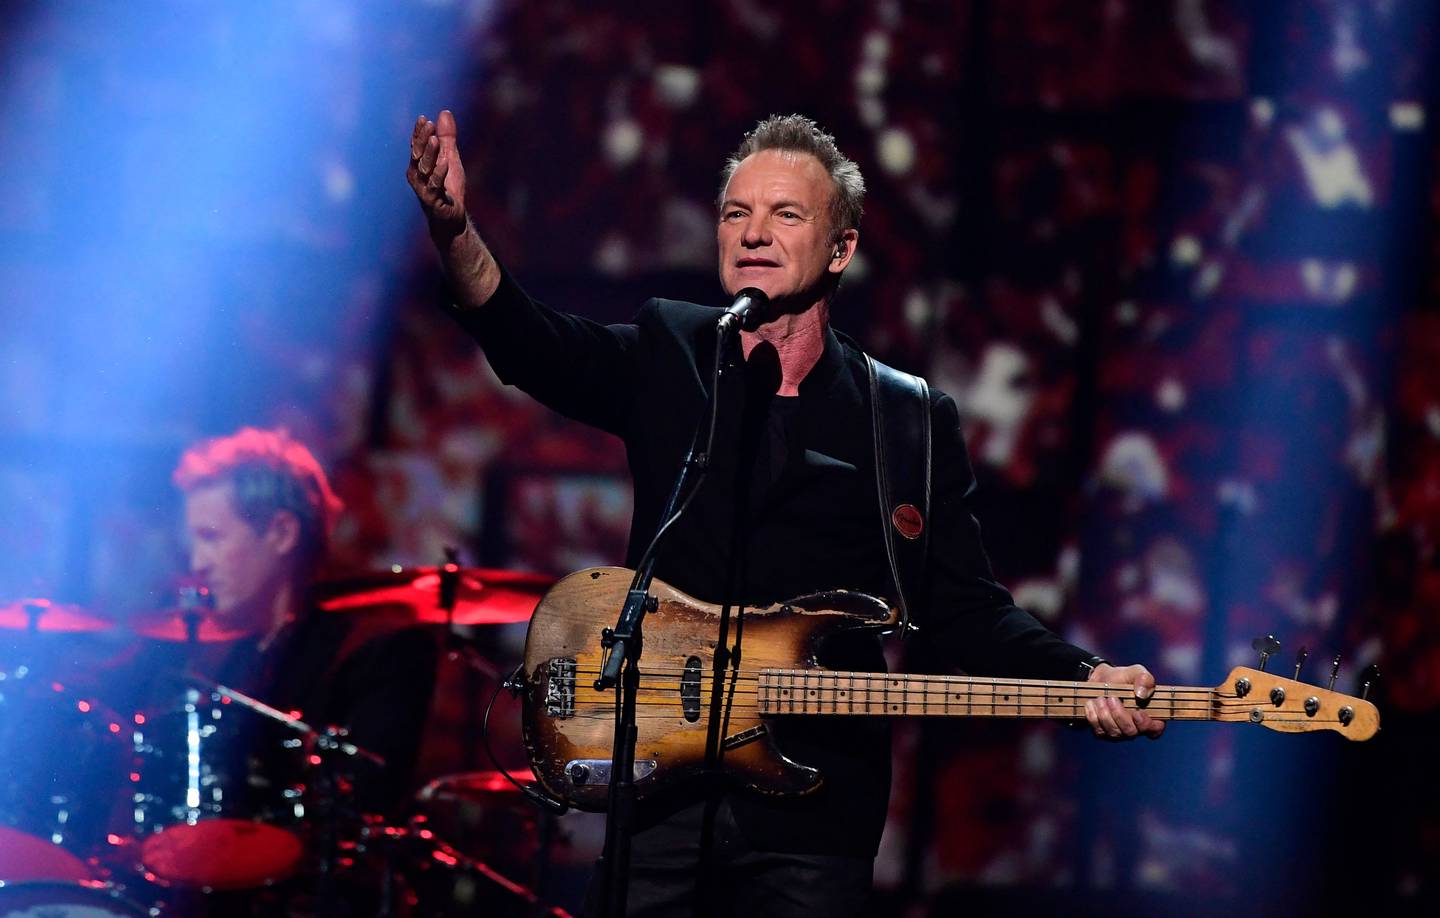 Musician Sting is in talks to sell his music catalogue for about $250 million. AFP